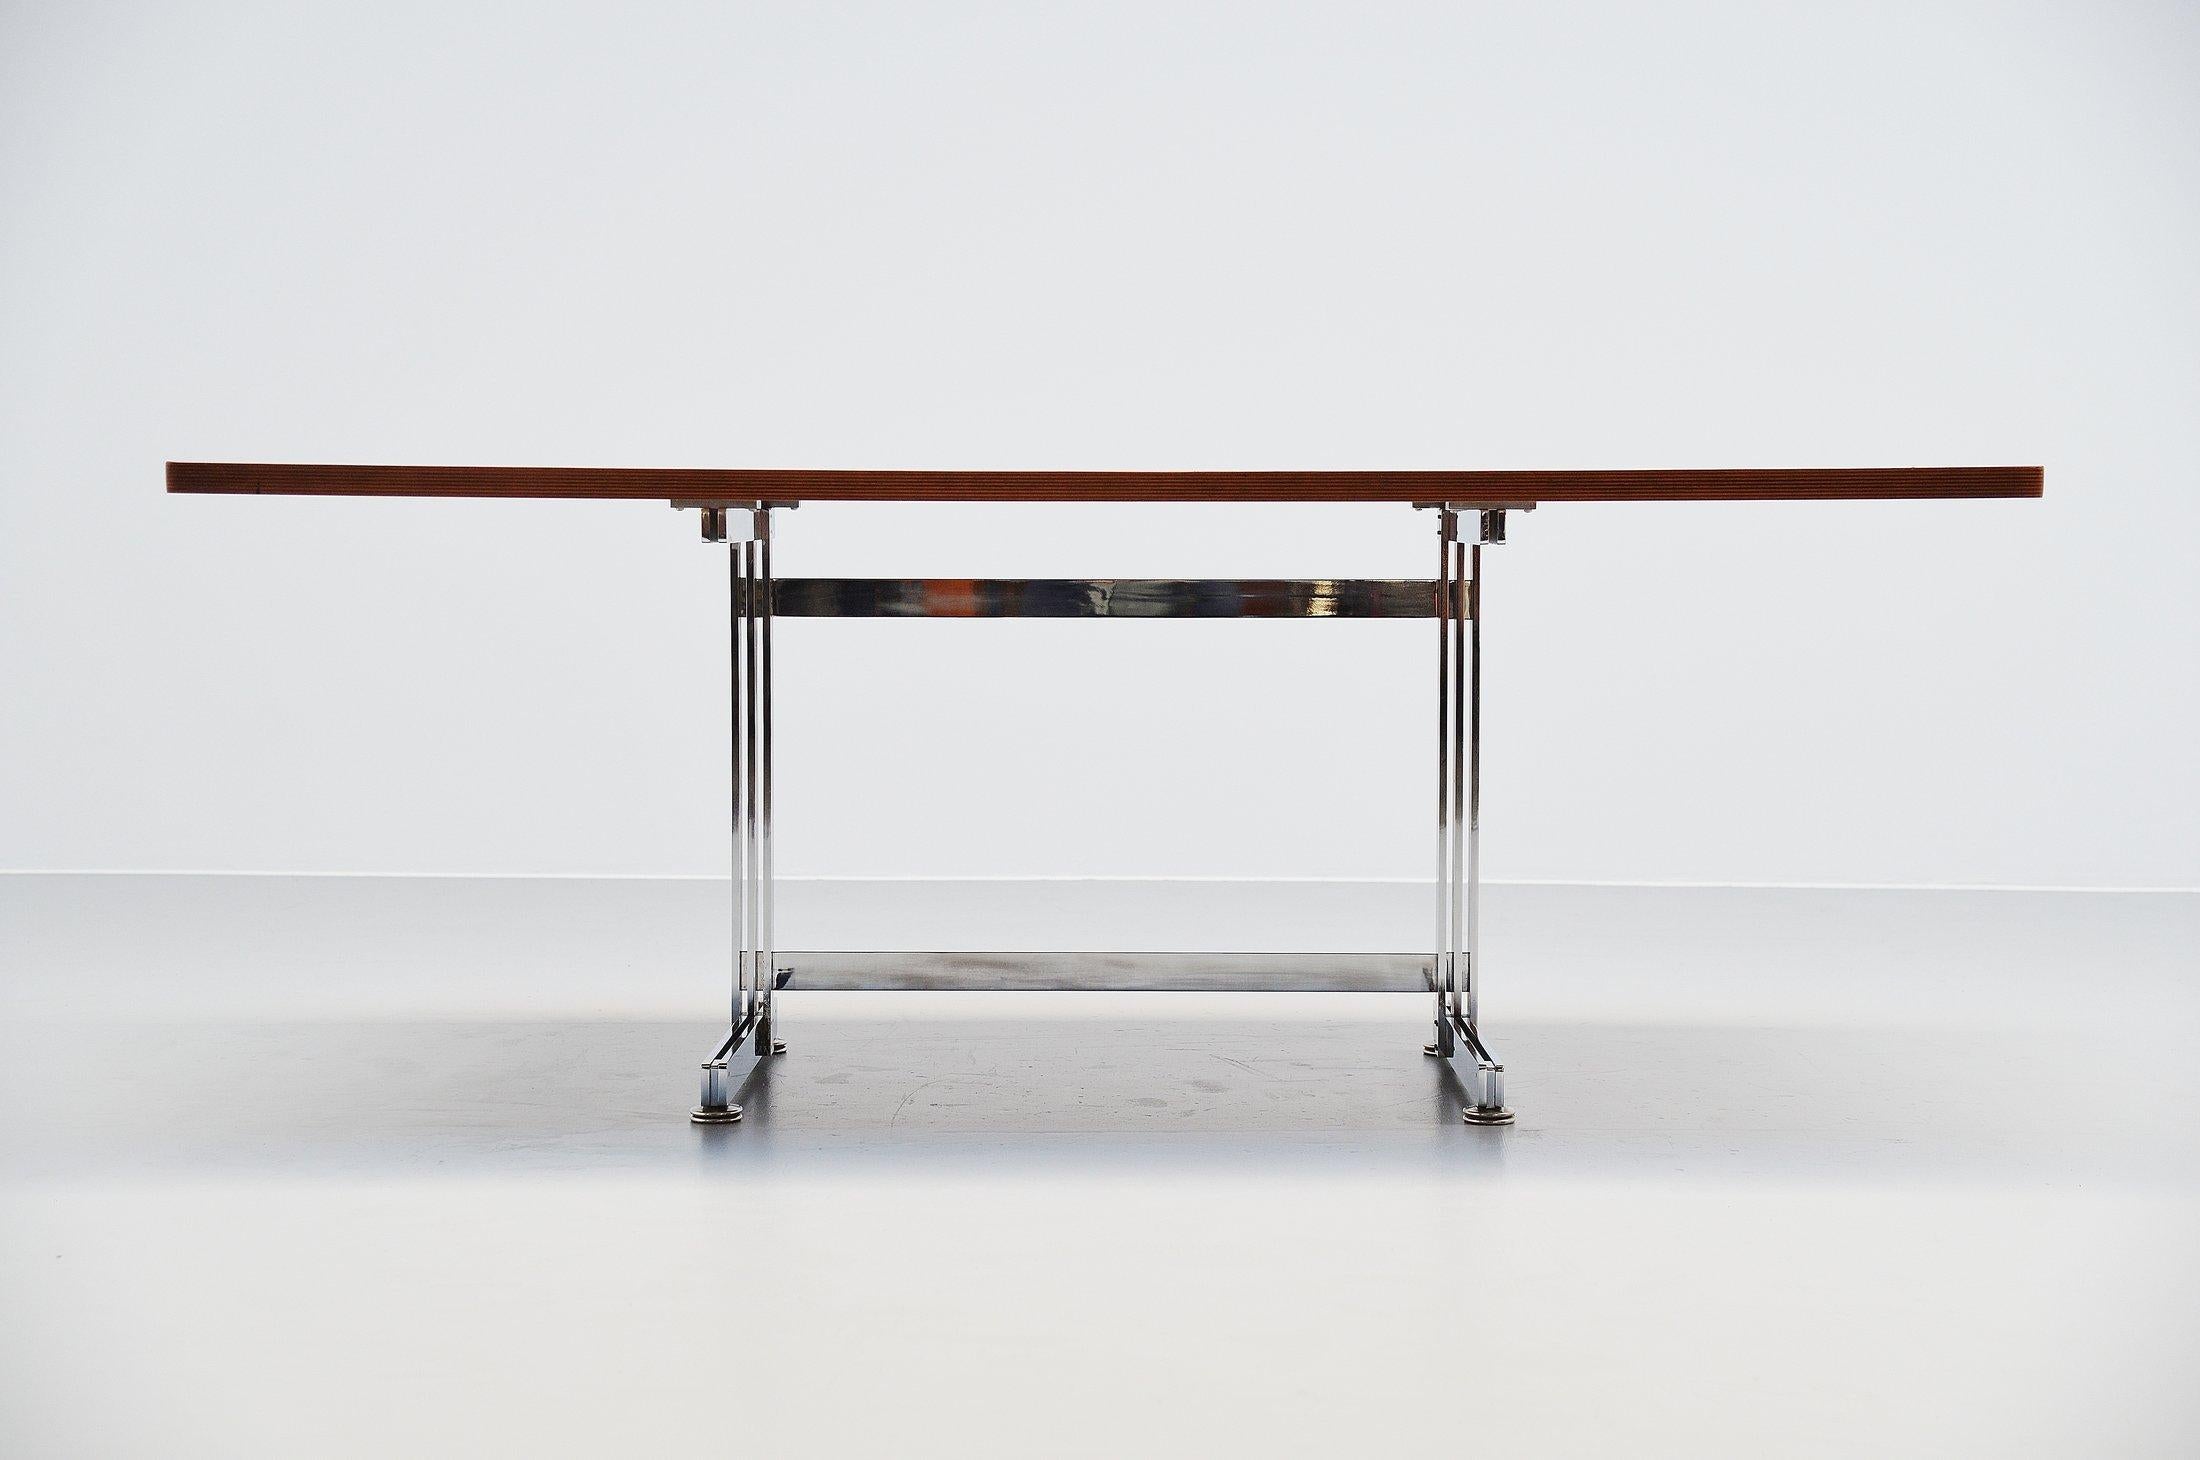 Rare large conference desk designed by Jules Wabbes and manufactured by Le Mobilier Universel, Belgium, 1960. This is for a high heavy quality modernist desk by famous Belgian designer Jules Wabbes. This desk has an original rosewood veneered